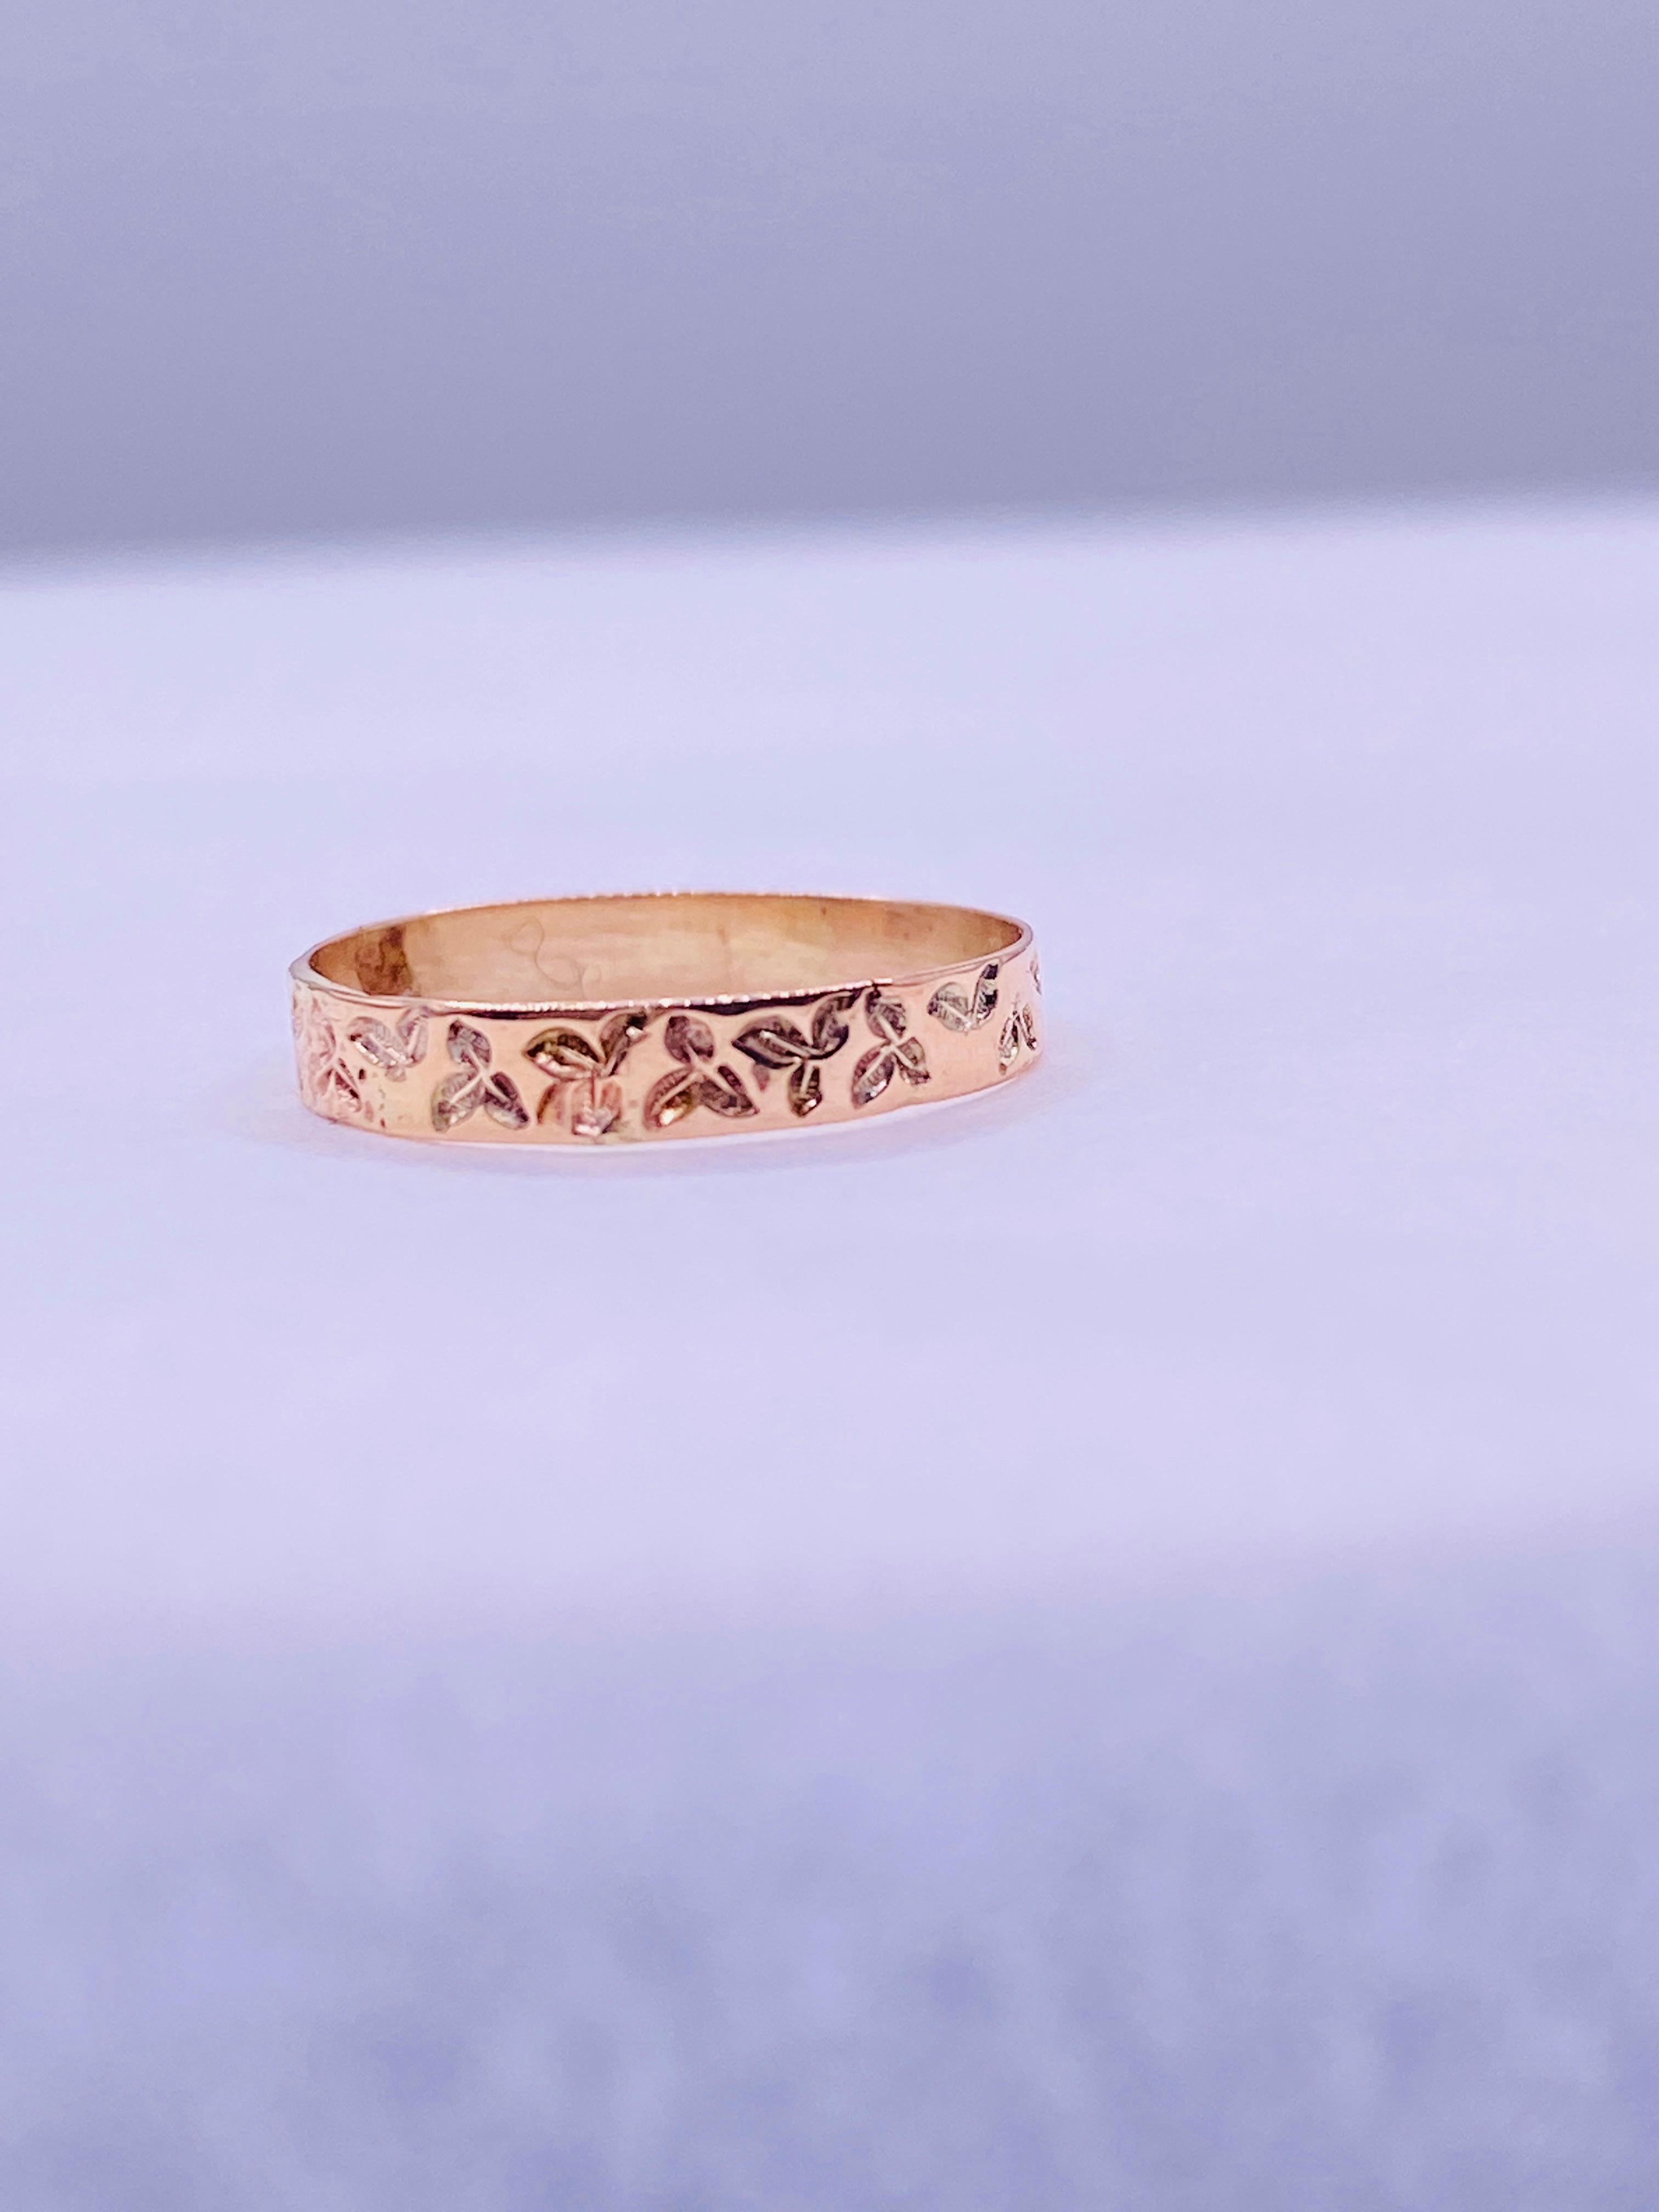 Antique 12k yellow gold  patterned infant baby band ring 0.3Dwt. Size 2.5 US